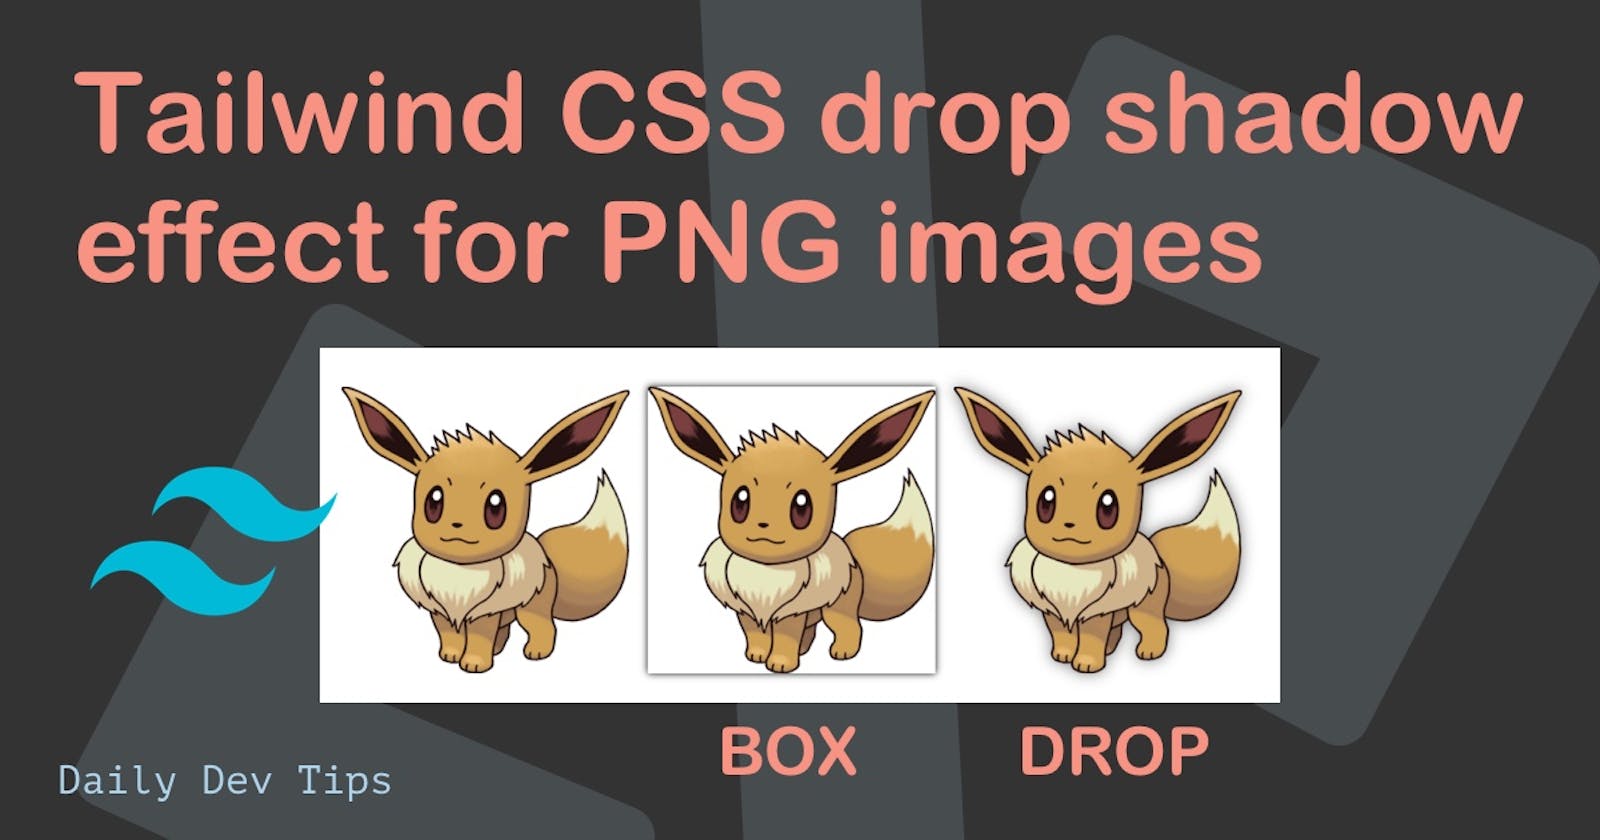 Tailwind CSS drop shadow effect for PNG images